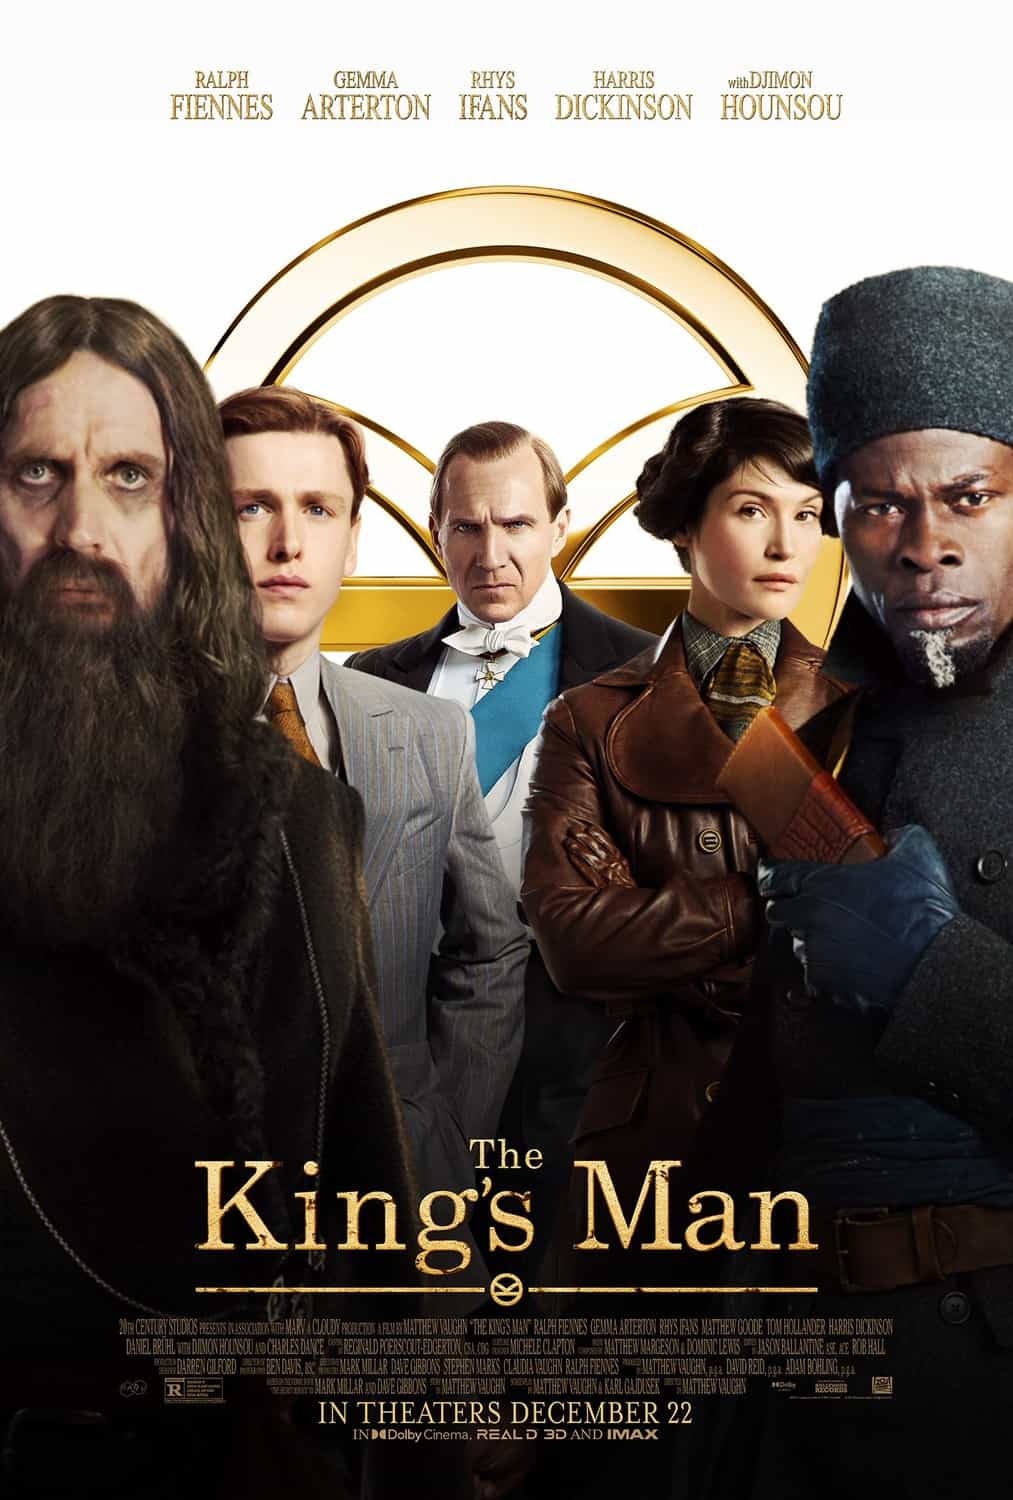 Second trailer for the upcoming prequel movie The Kings Man from director Matthew Vaughn